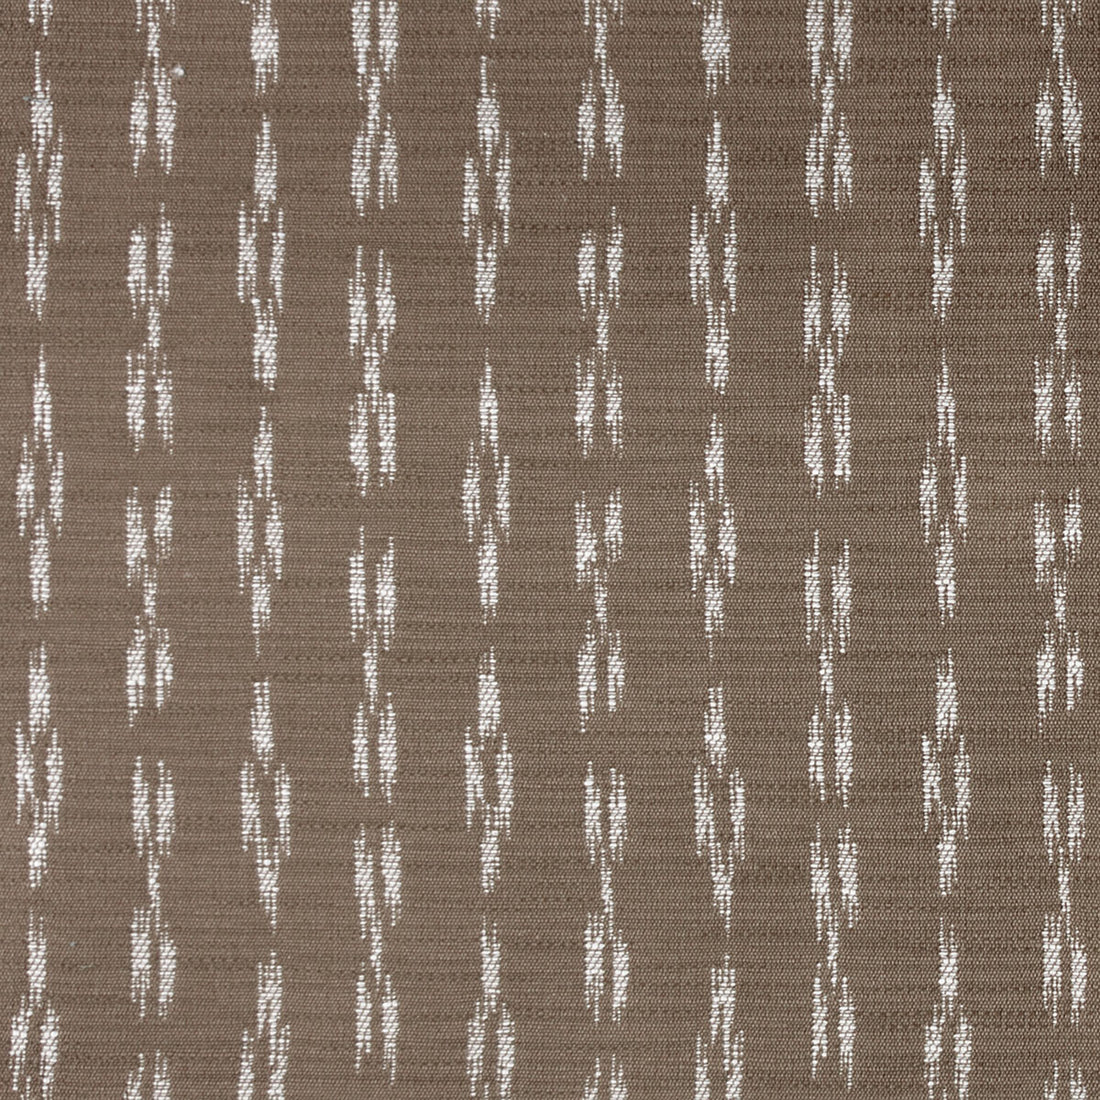 Yoko fabric in topo color - pattern GDT5647.001.0 - by Gaston y Daniela in the Gaston Japon collection